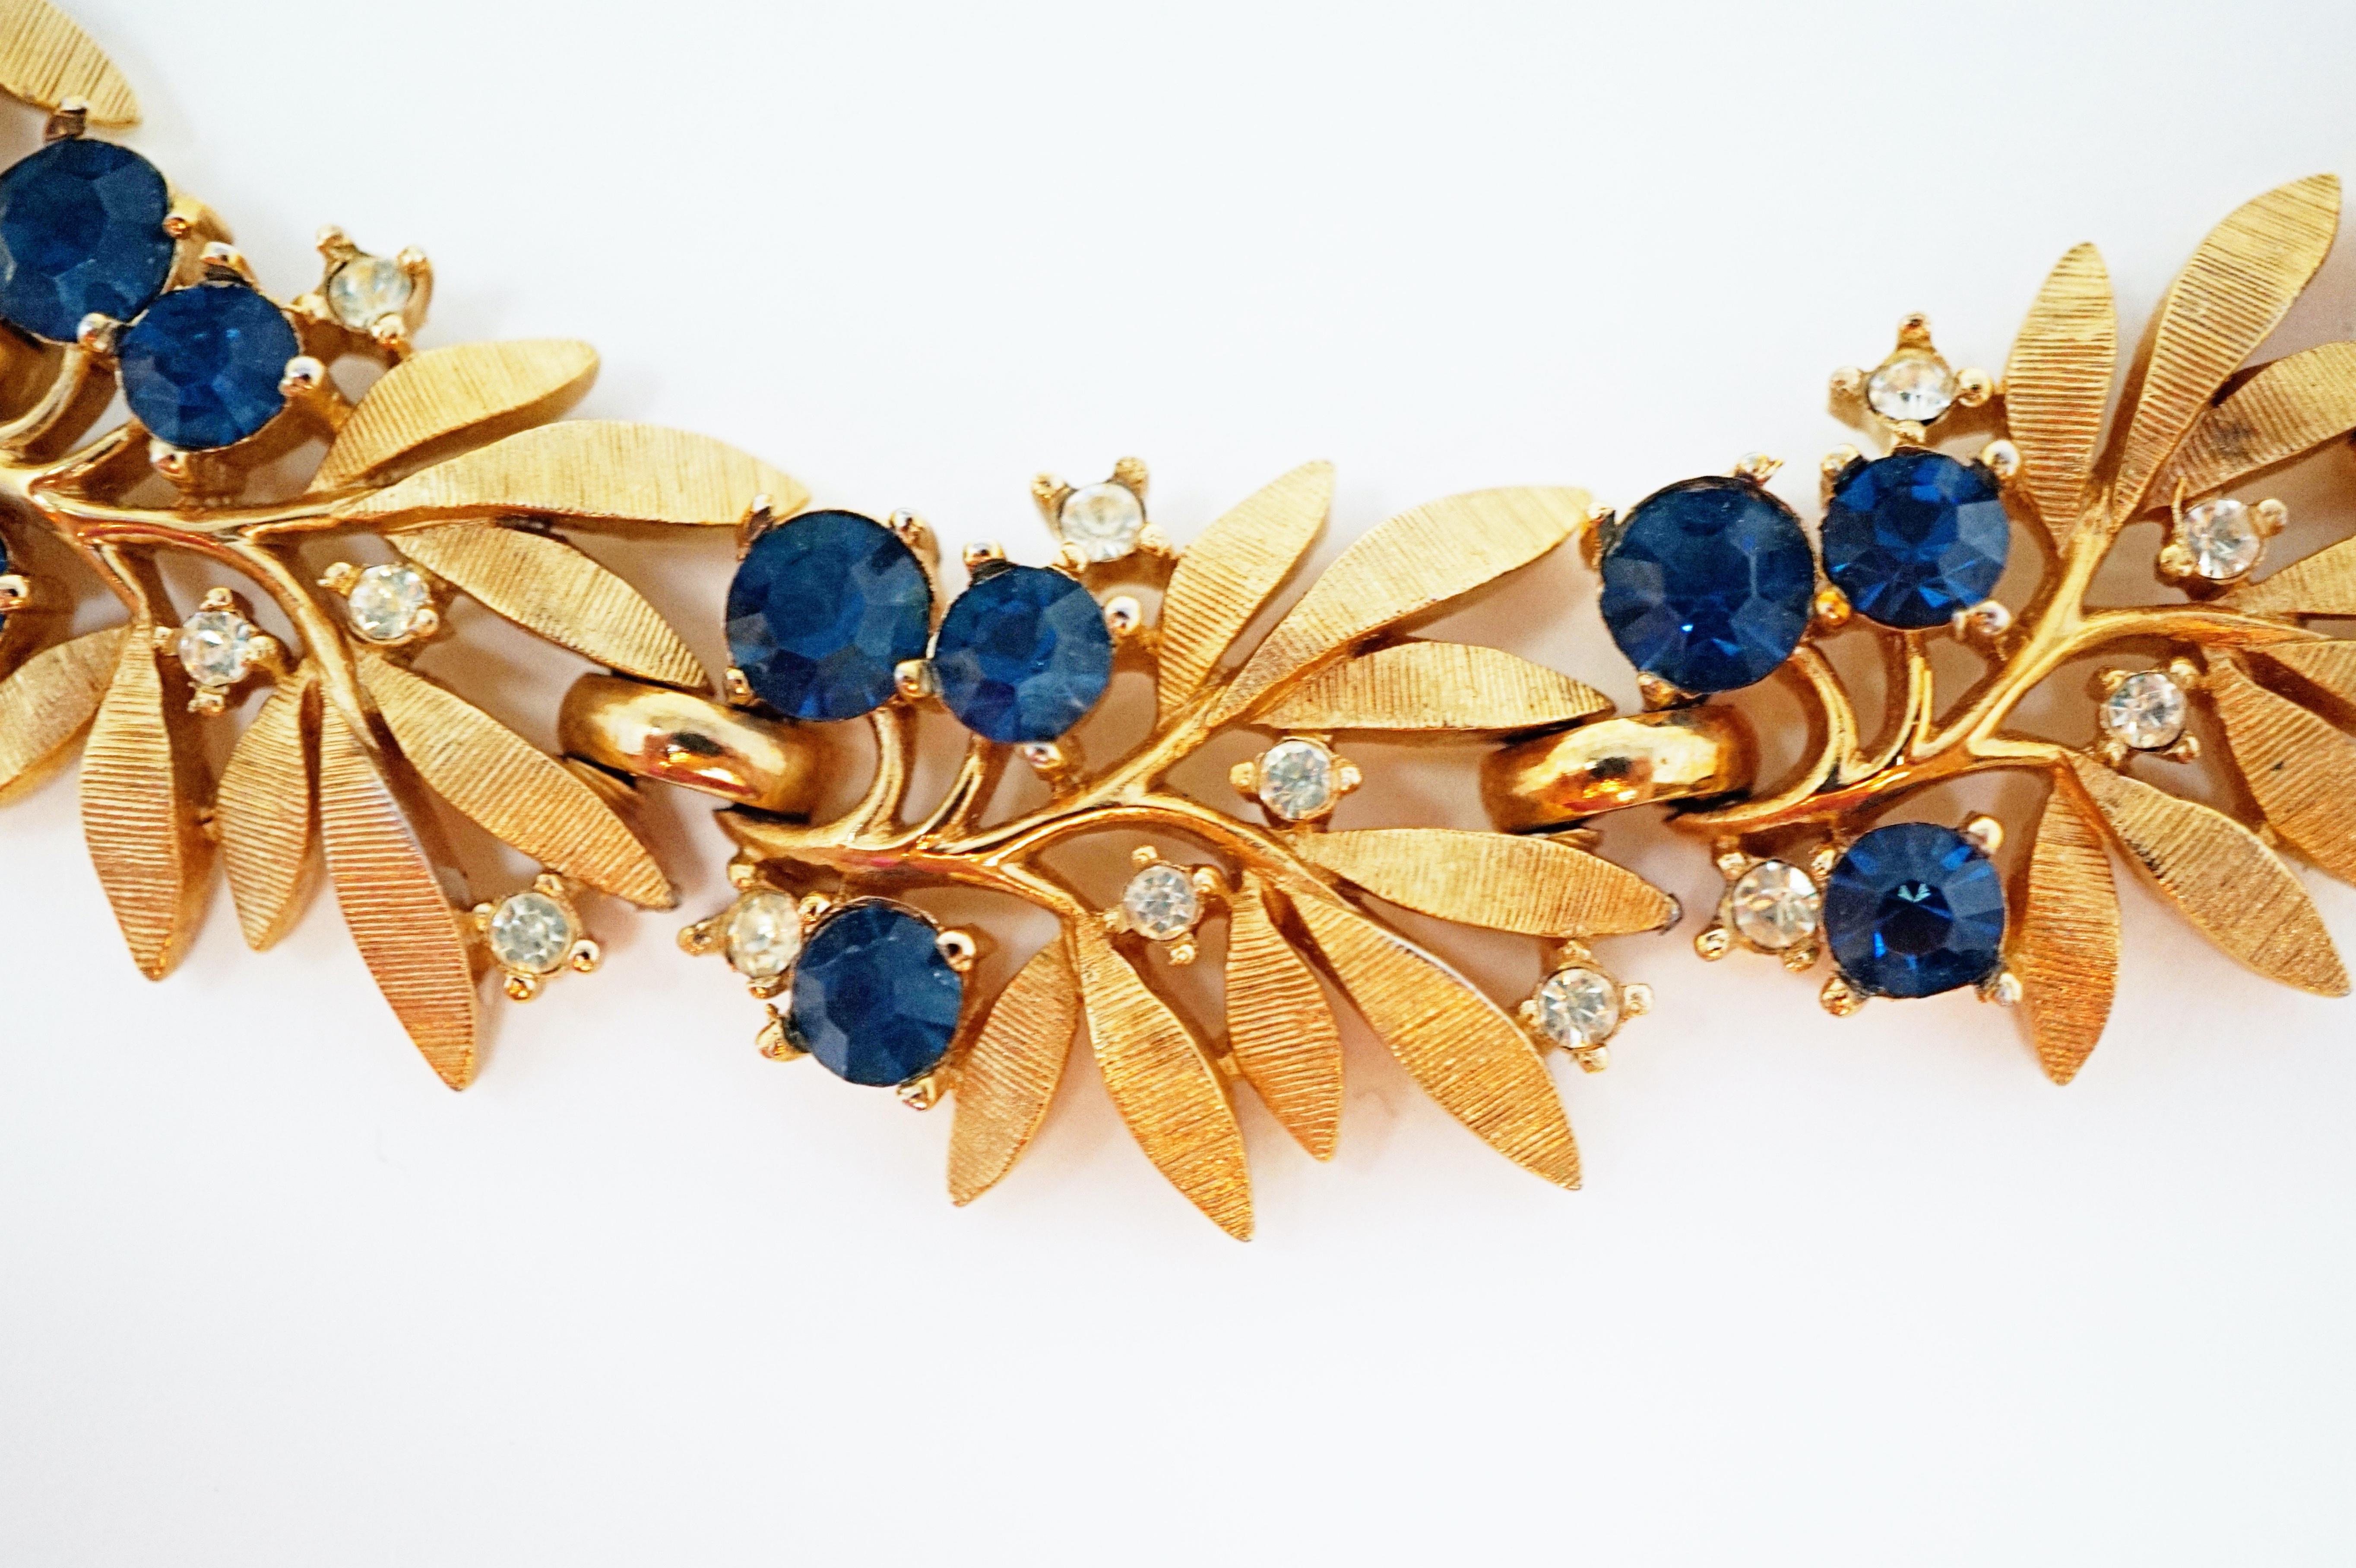 This rare and exquisite gilded choker necklace by Trifari, circa 1955, is one of the best examples of the brand's incredibly high-end craftsmanship we've ever seen. Trifari is a highly collected costume jewelry brand, noted for its quality and